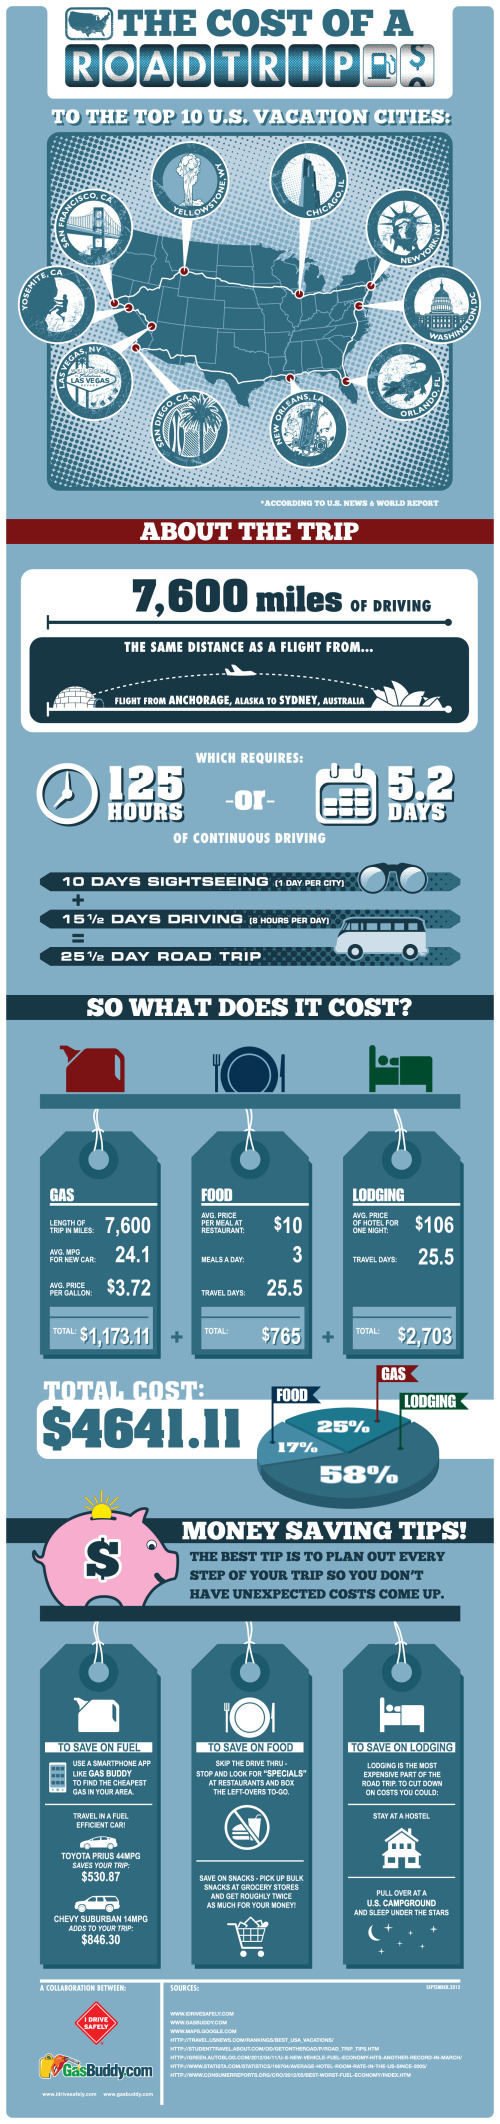 The Cost of a Road Trip to the Top 10 U.S. Vacation Cities infographic